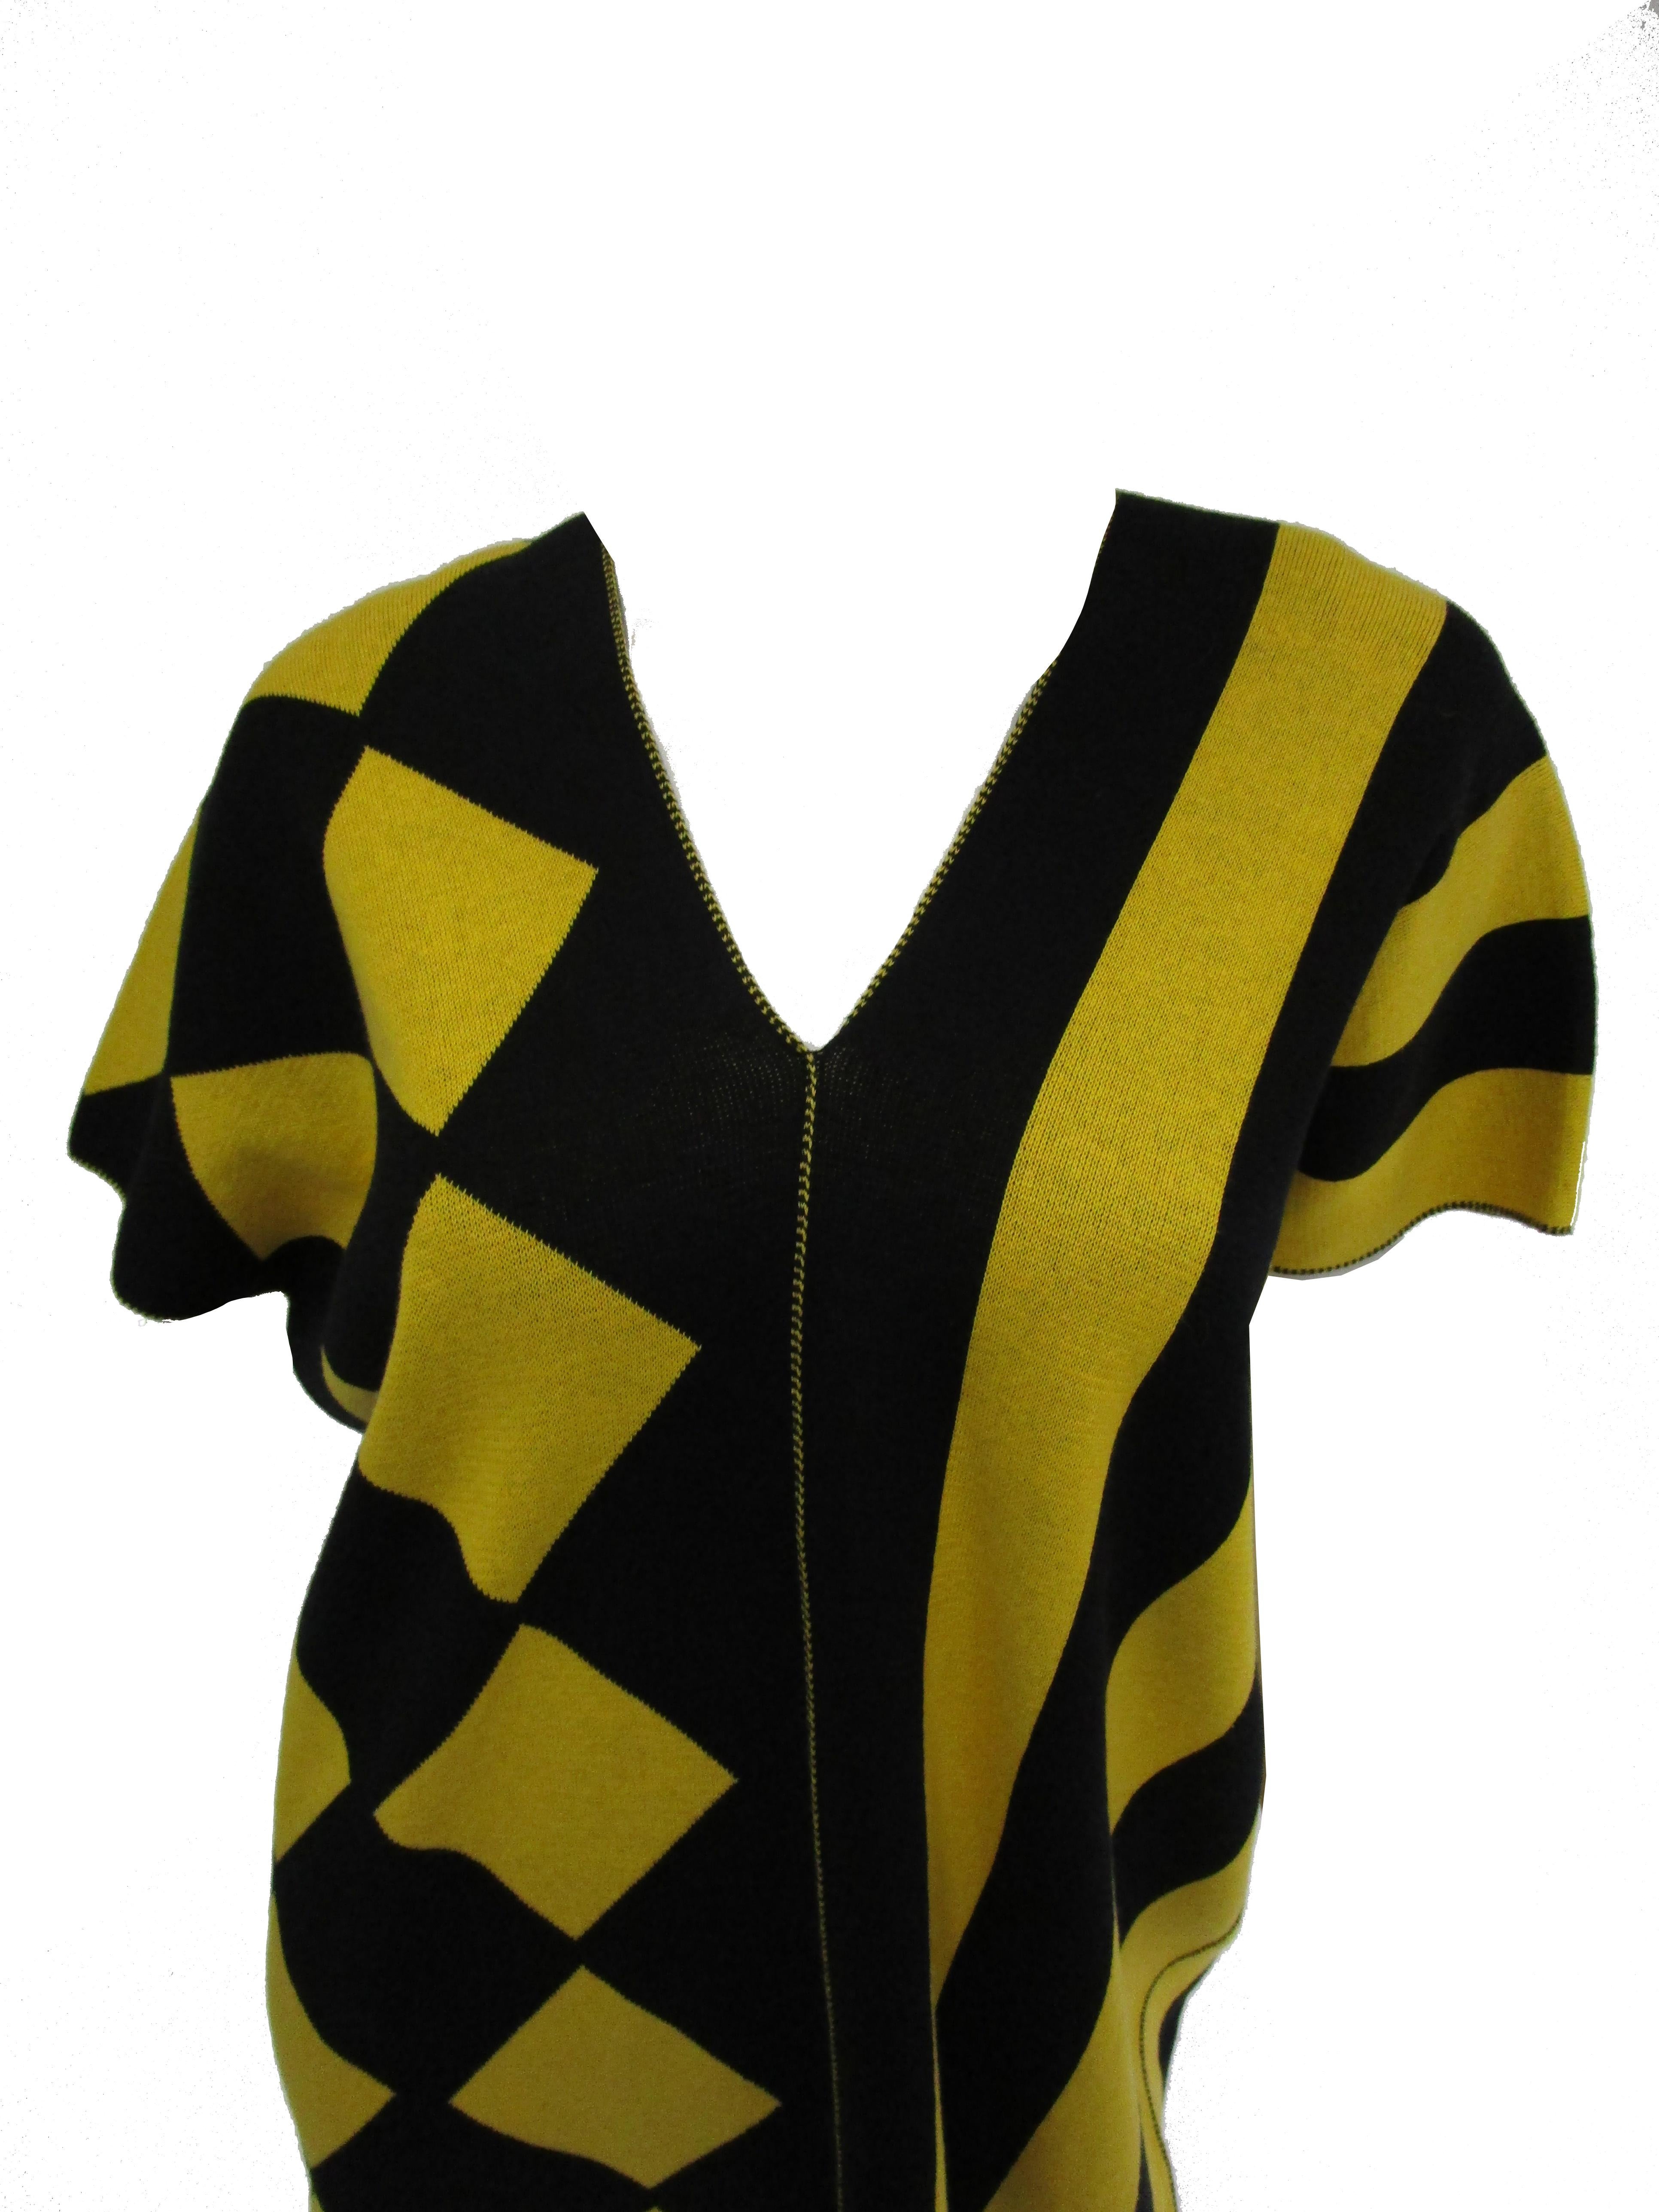 1980s Issey Miyake Yellow and Black Diamond and Stripe Cotton Knit Top For Sale 2